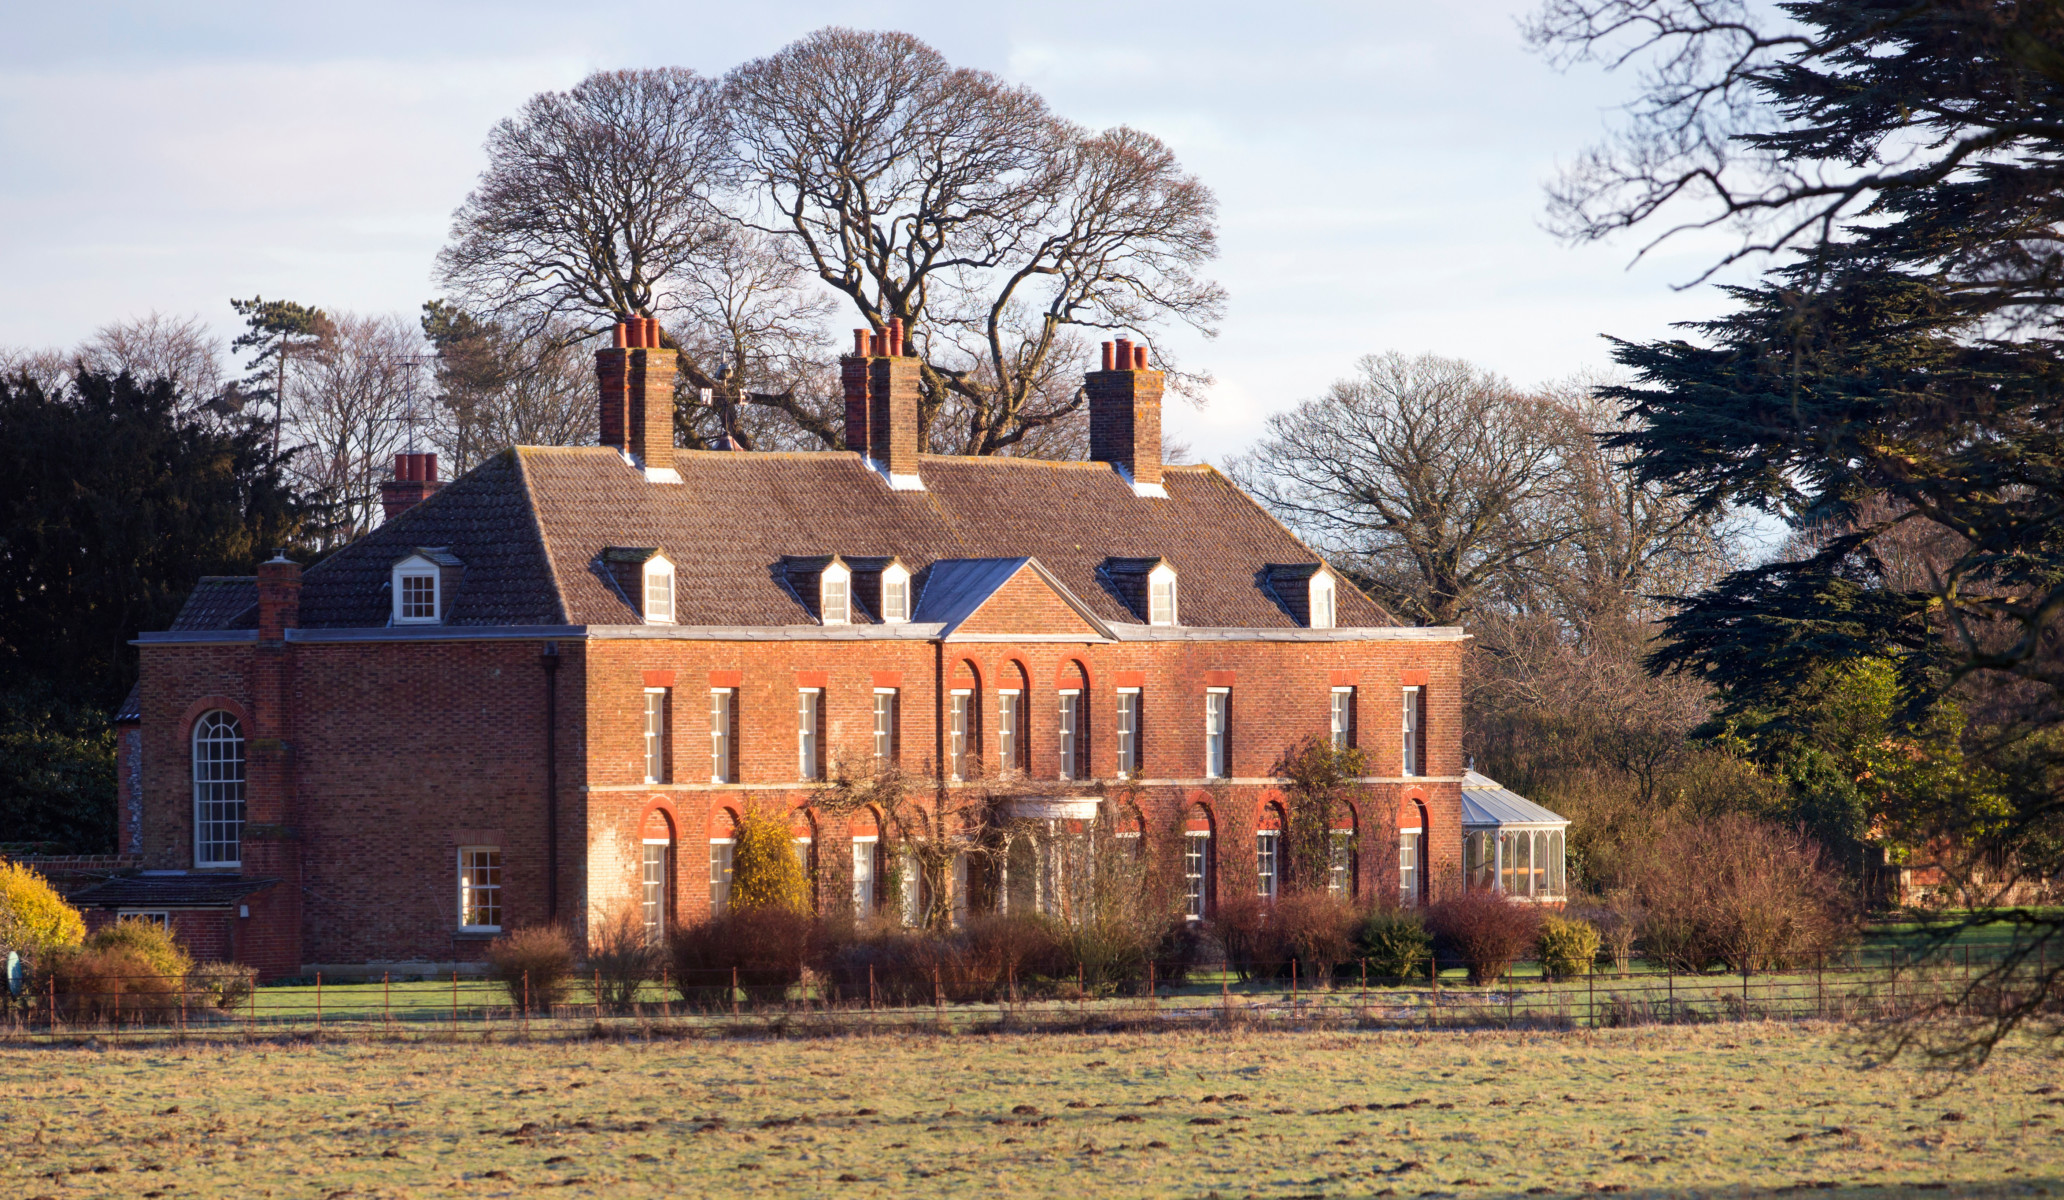 The Duke and Duchess of Cambridge are currently self-isolating with their three kids at their countryside home, Anmer Hall in Norfolk